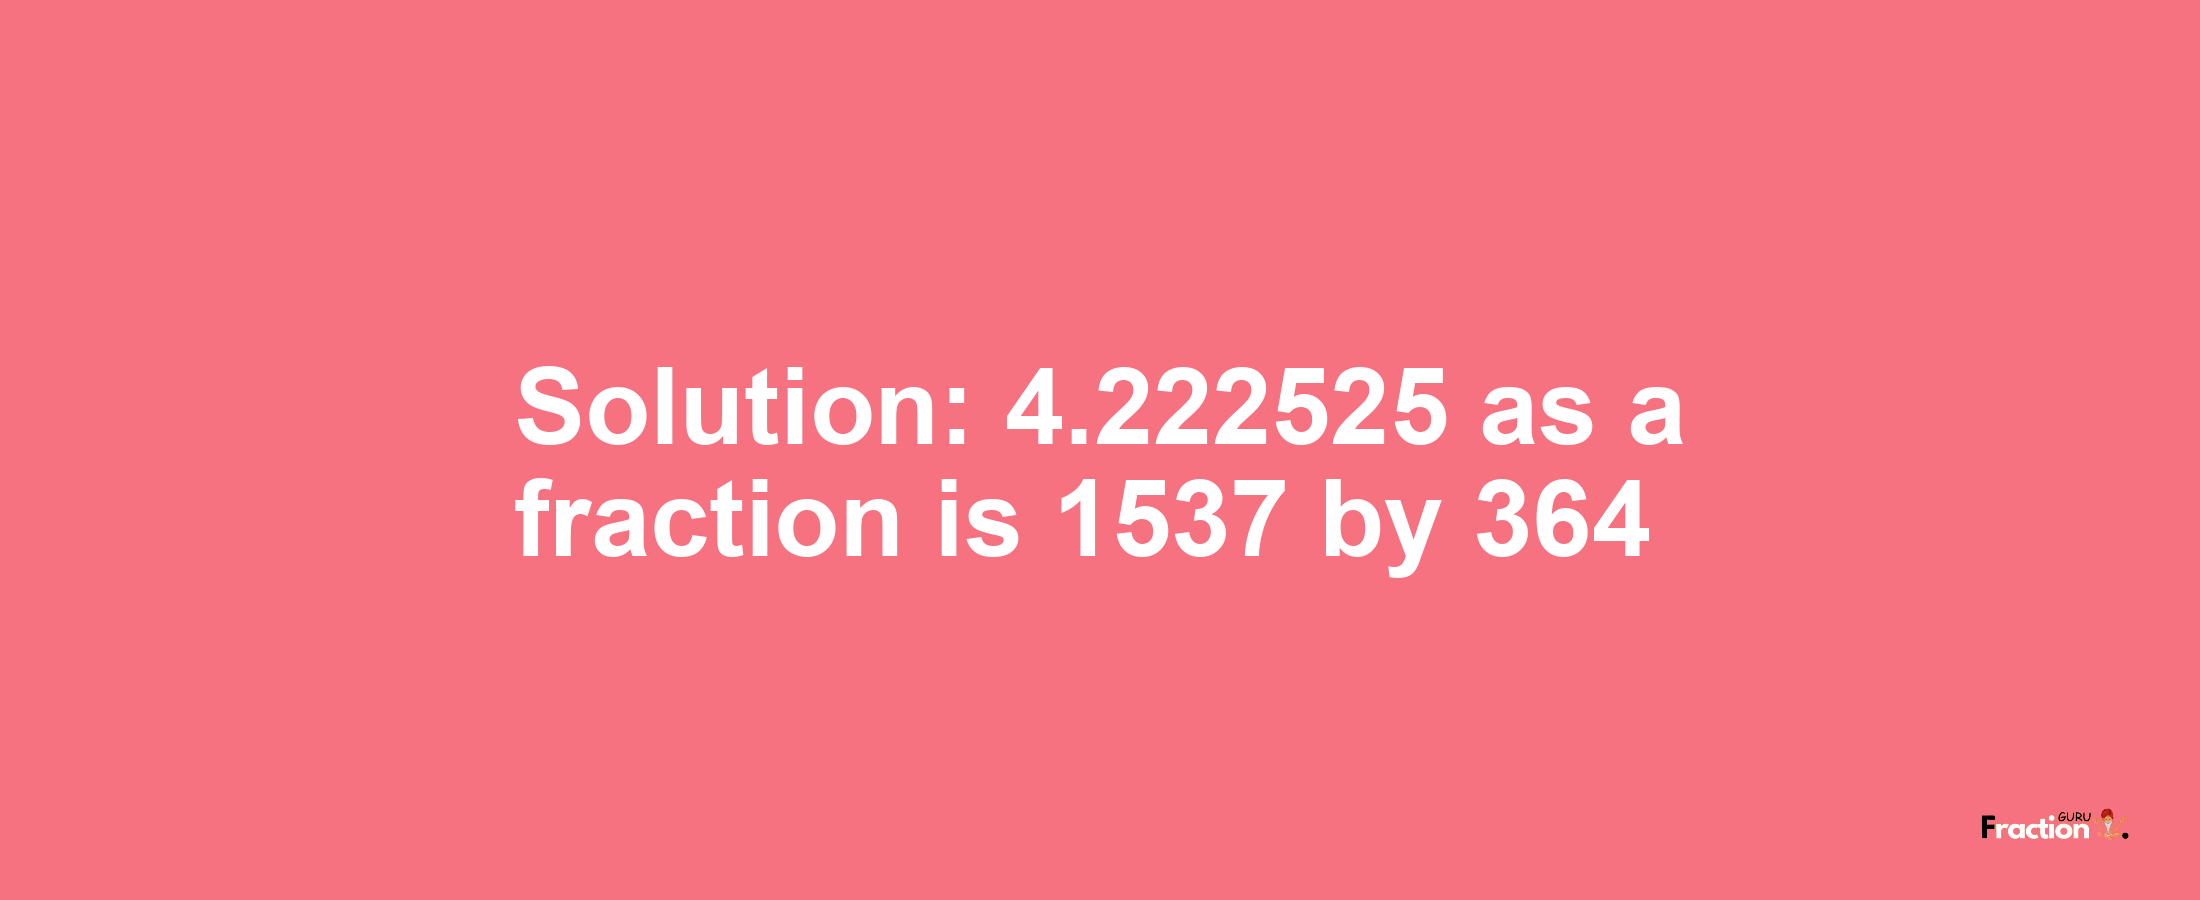 Solution:4.222525 as a fraction is 1537/364